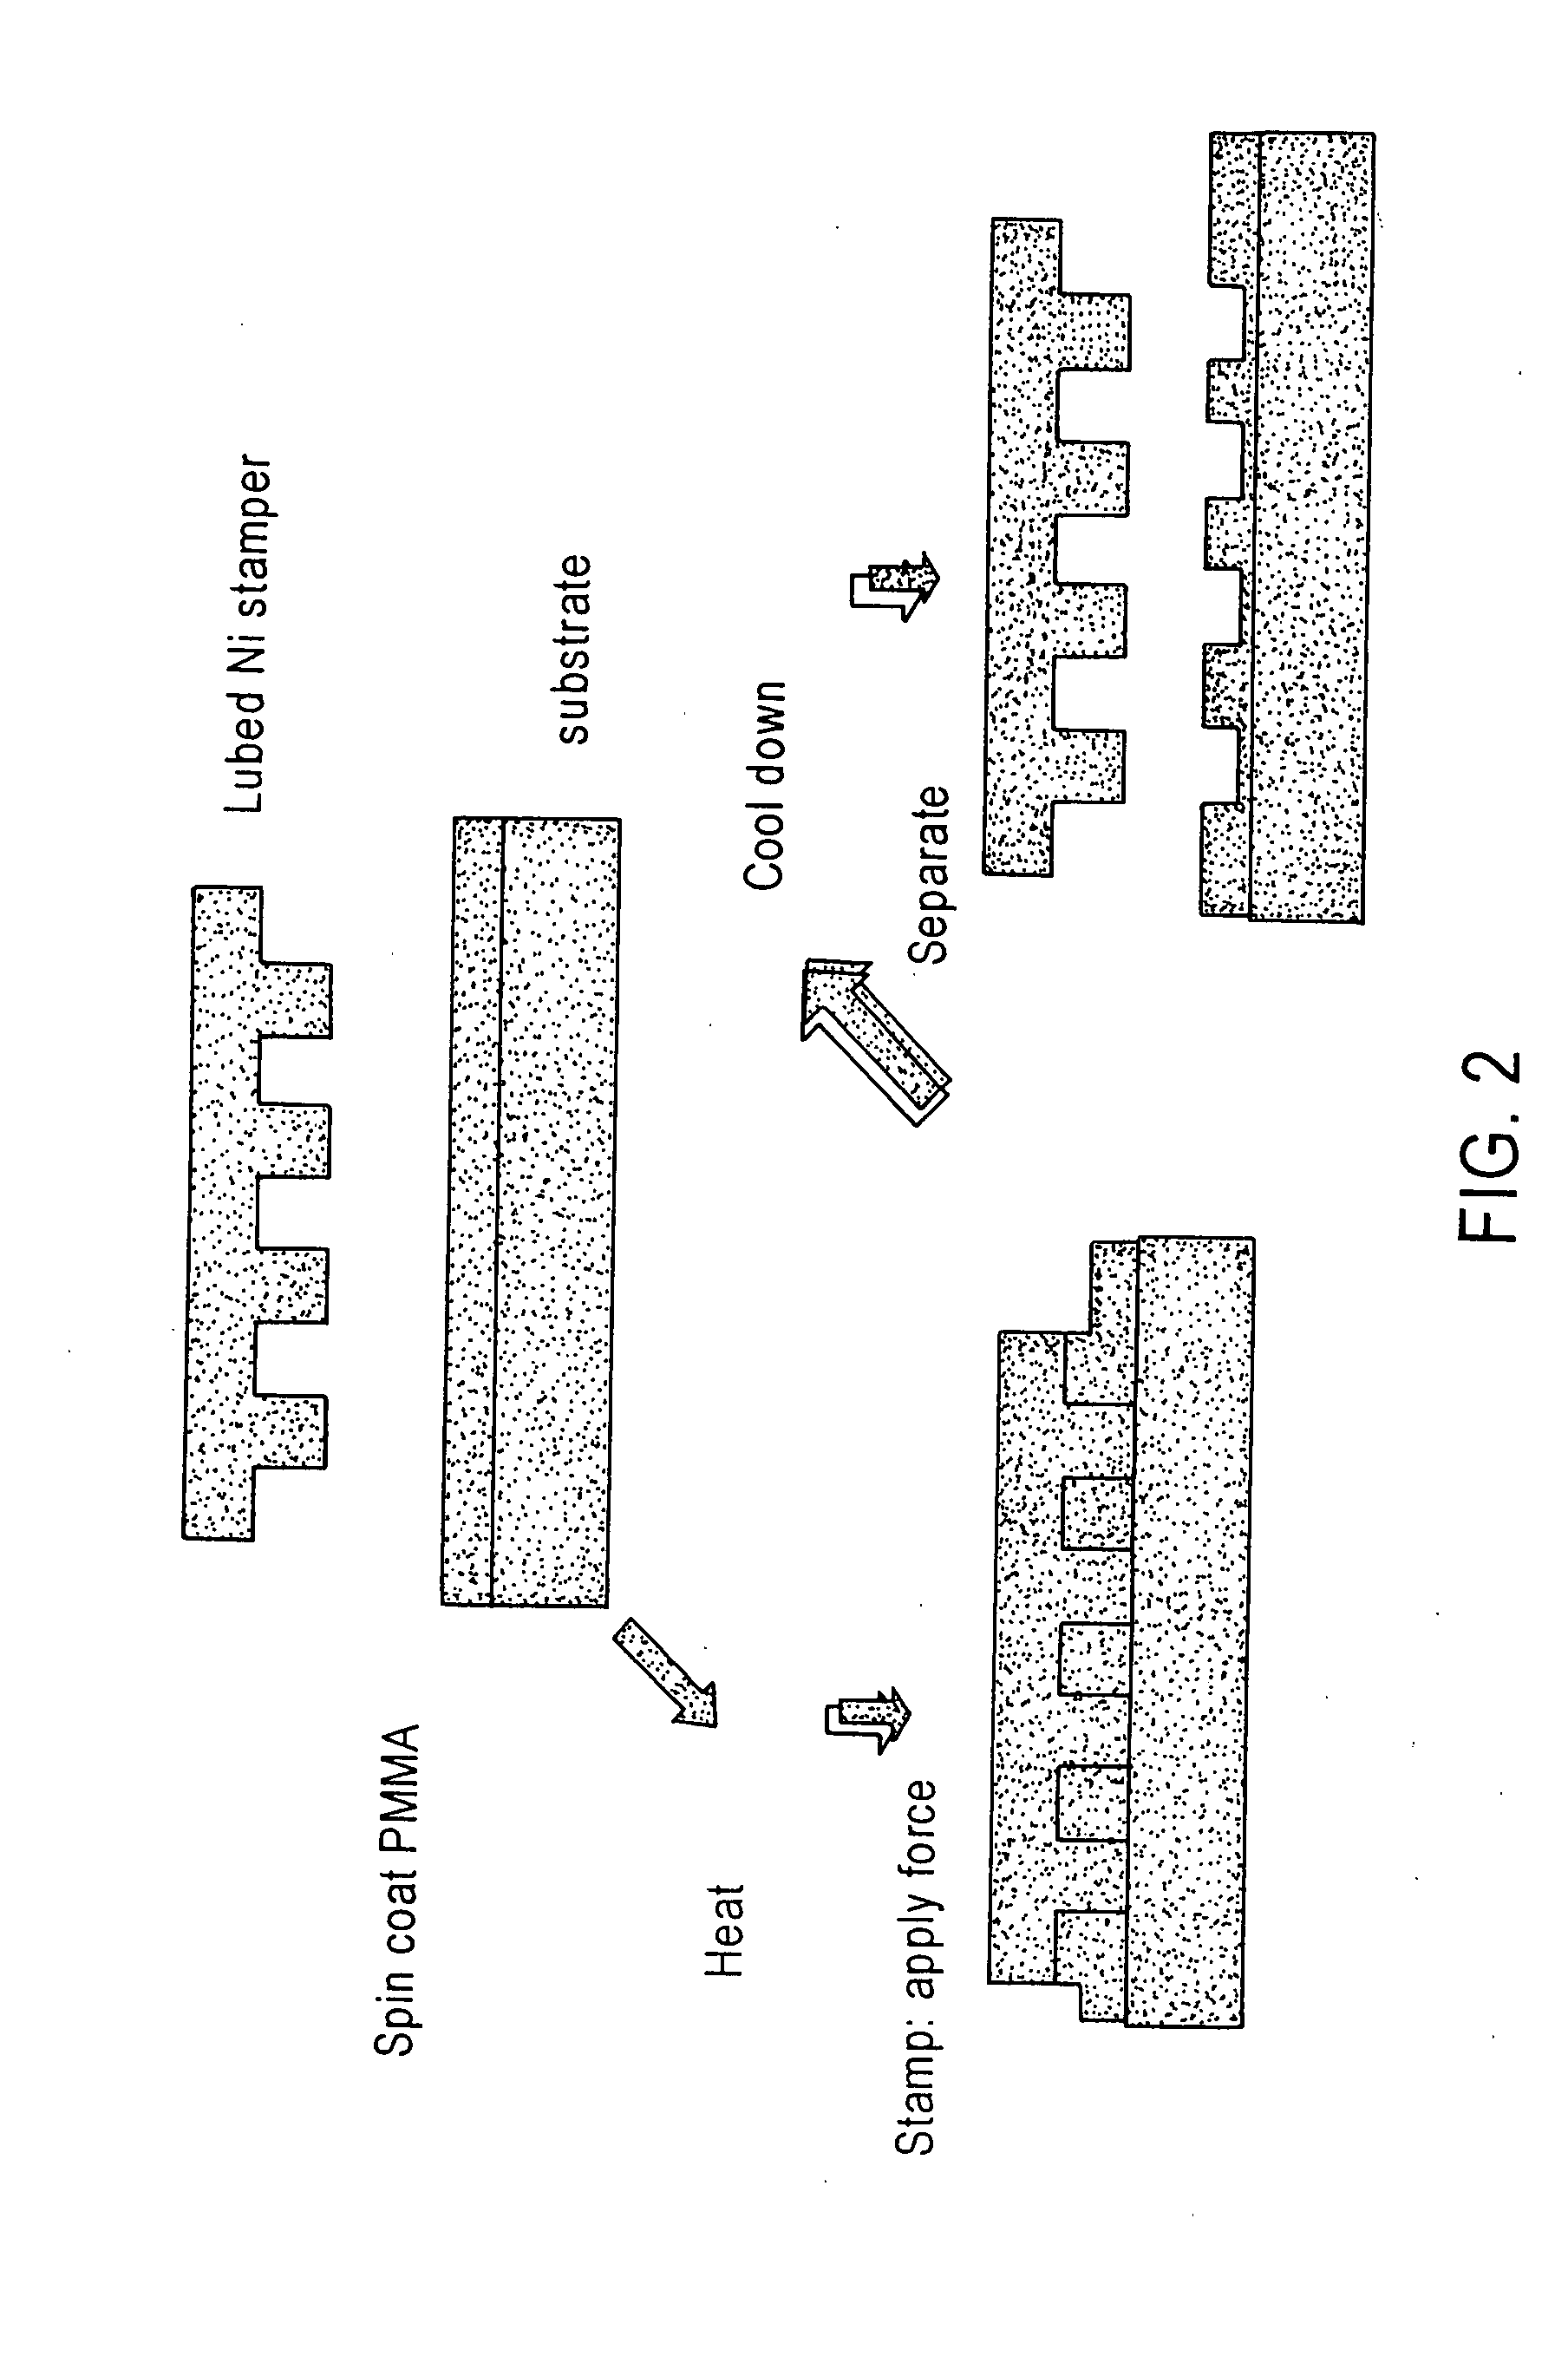 Surface modified stamper for imprint lithography